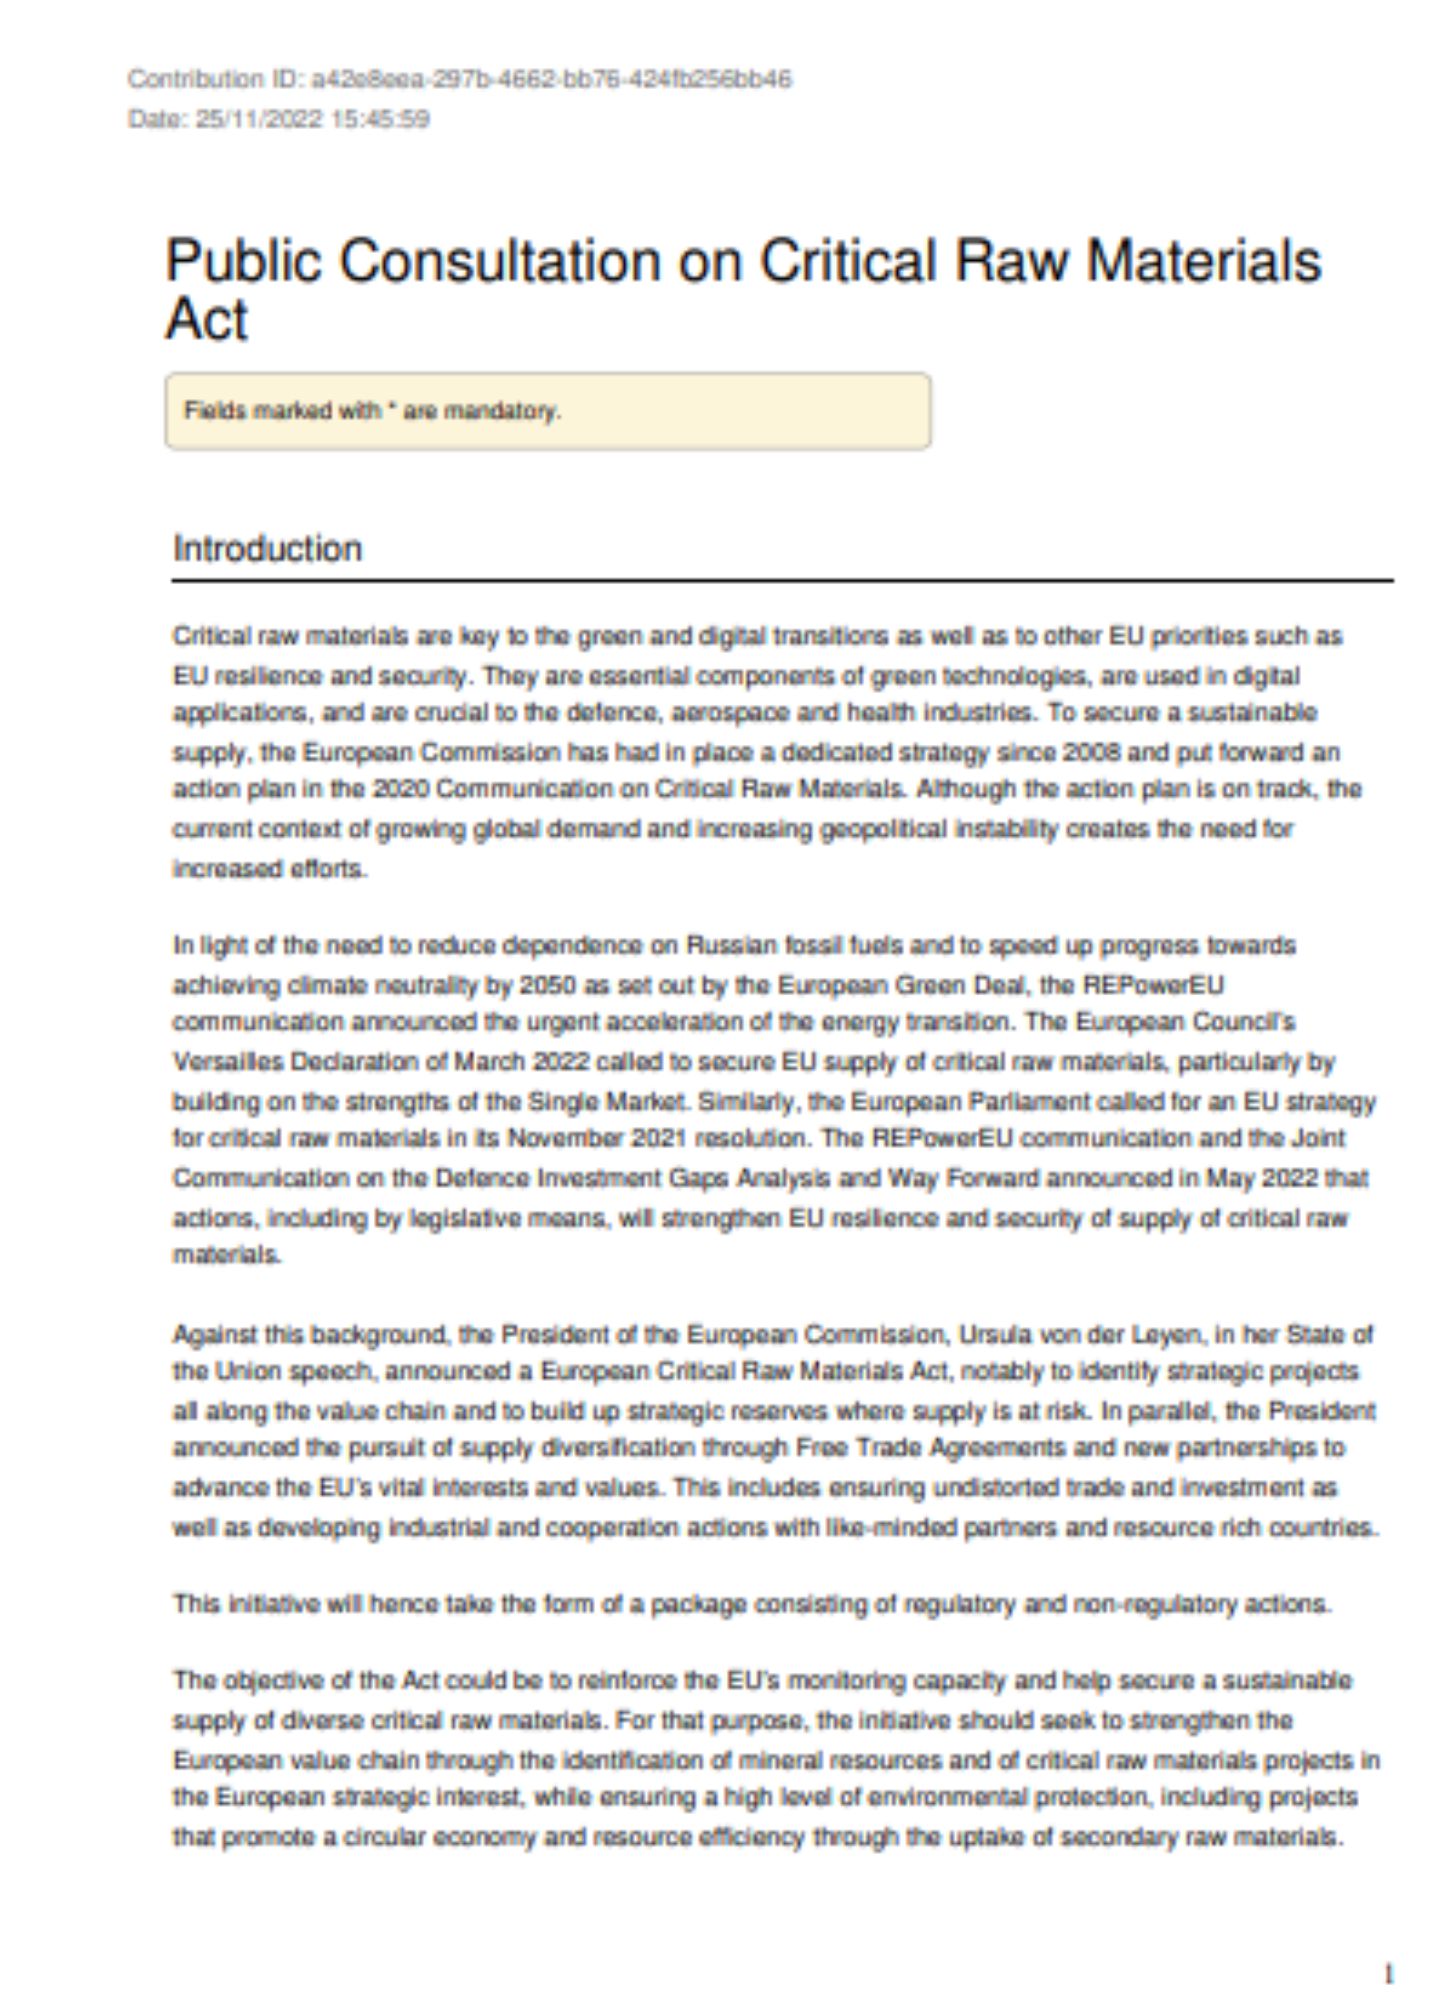 Public consultation to the Critical raw materials act